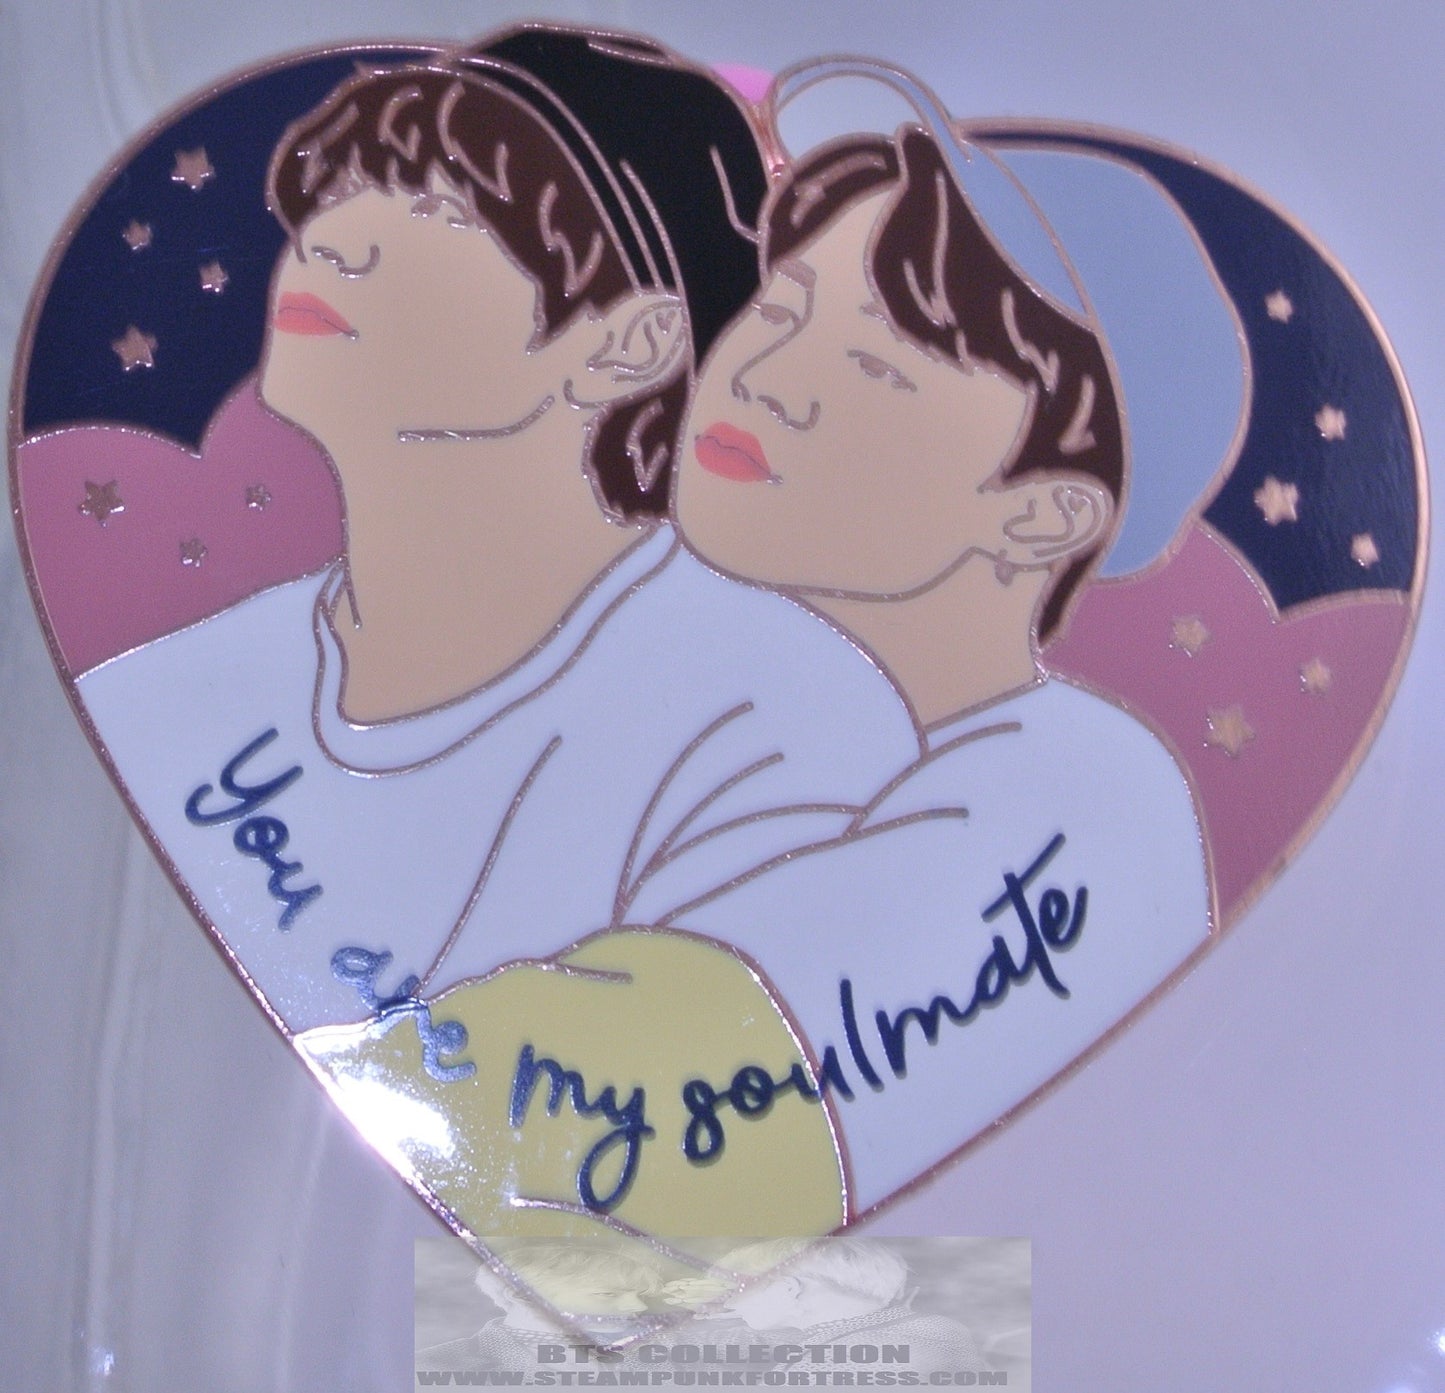 BTS ENAMEL PIN BADGE BUTTON V KIM TAEHYUNG PARK JIMIN ROSE GOLD COPPER HEART YOU ARE MY SOULMATE DAL PINS